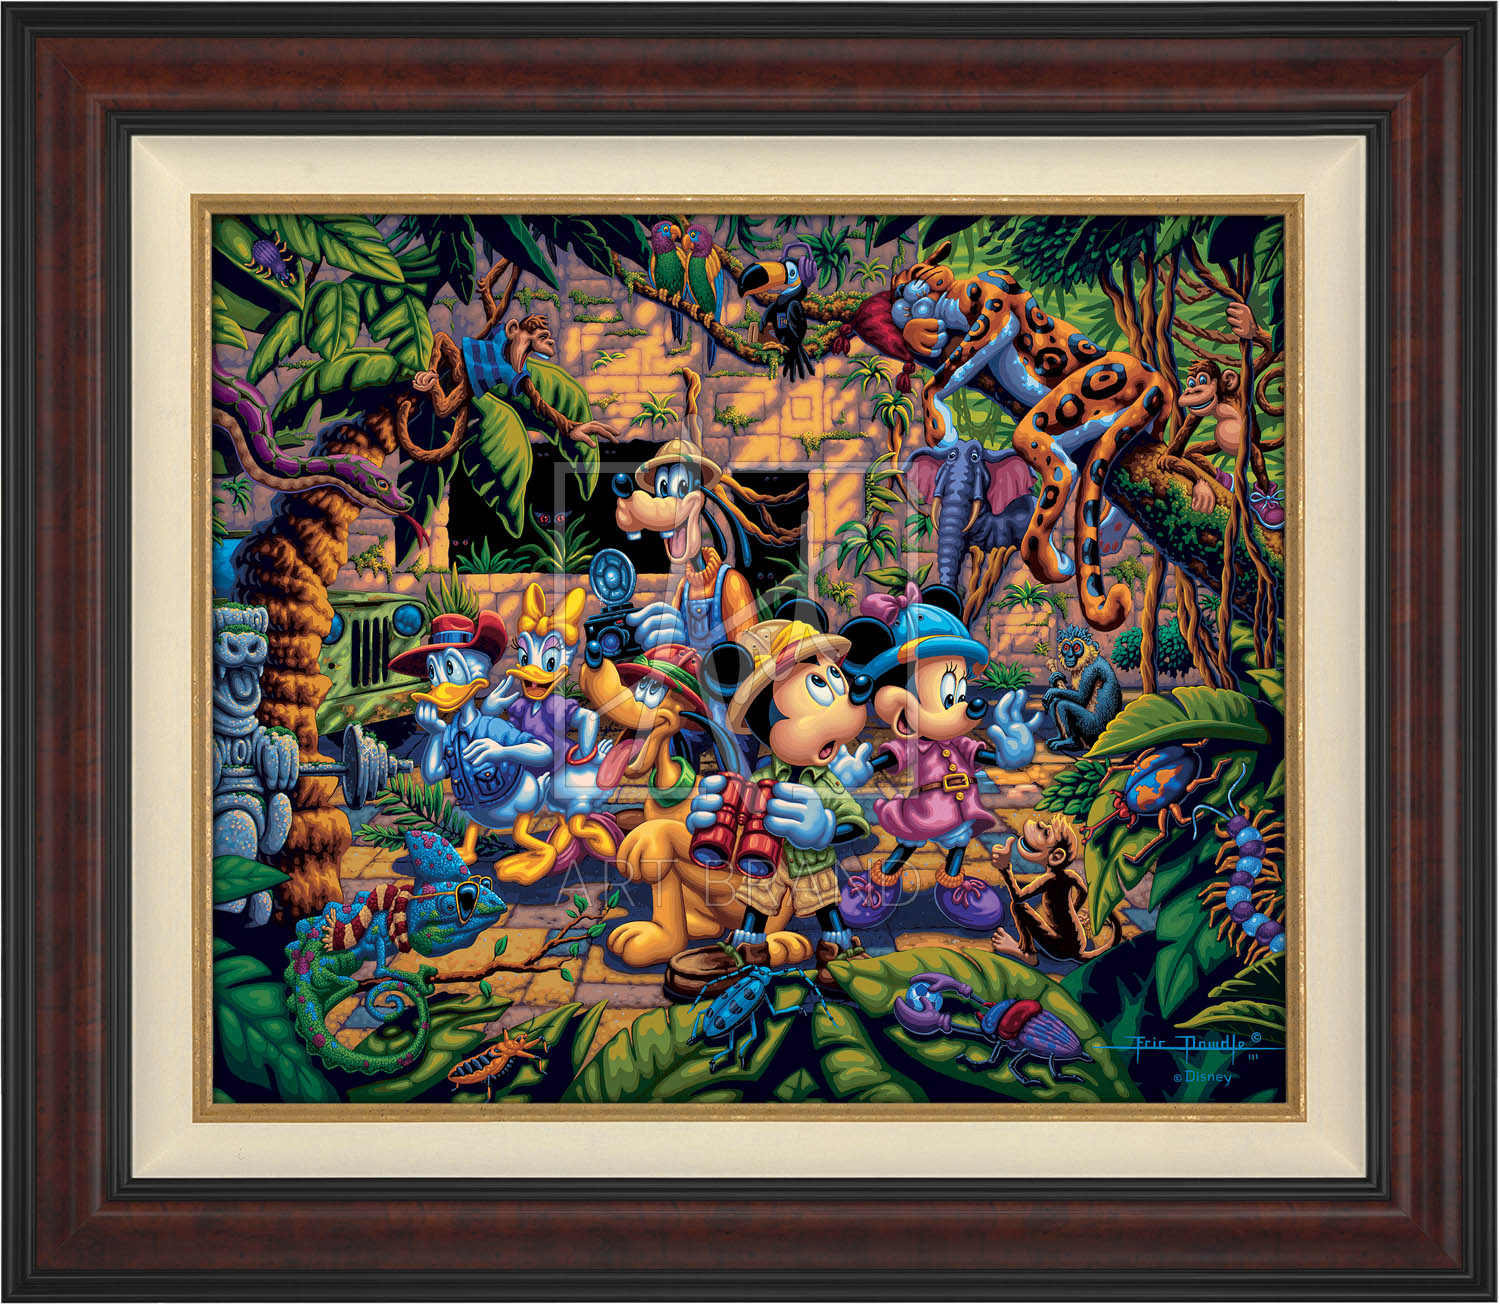 The lush jungle vegetation supports a variety of creatures great and small, including a chameleon, a variety of insects, a snake, birds, monkeys, and even a leopard and an elephant. Mickey and friends find themselves in the center of it all! - Burl frame